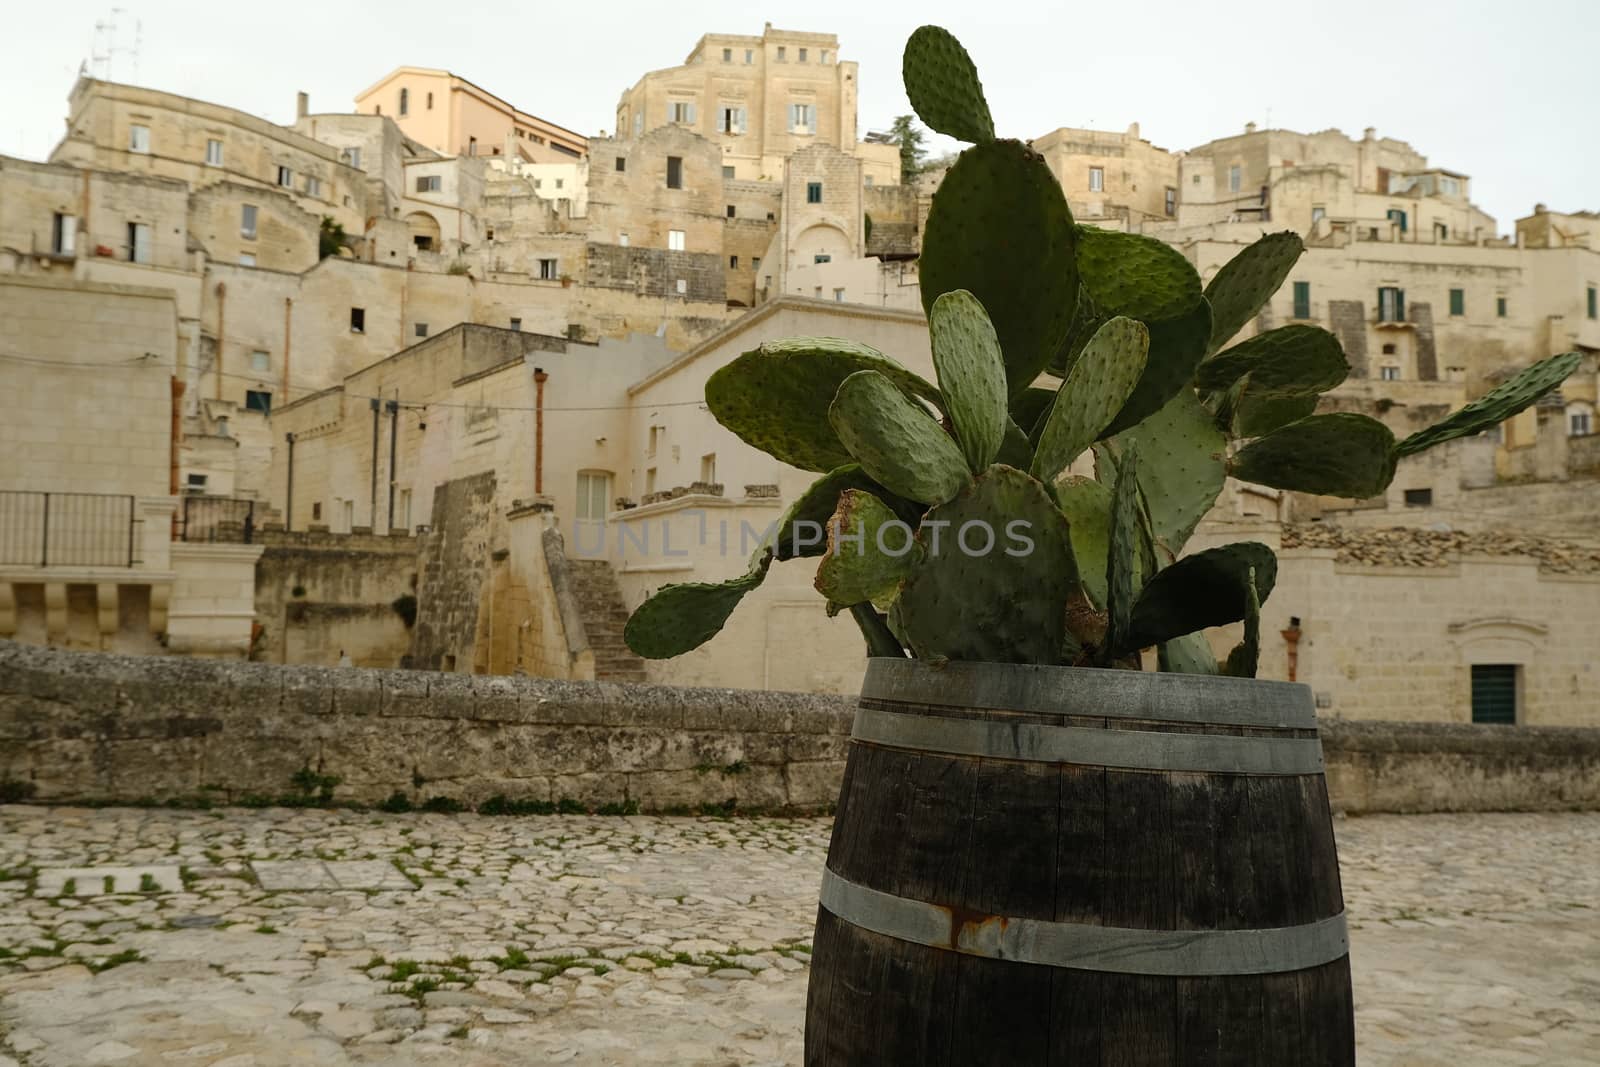 Prickly pear plant grown inside a wooden barrel. Panorama of the city of Matera.